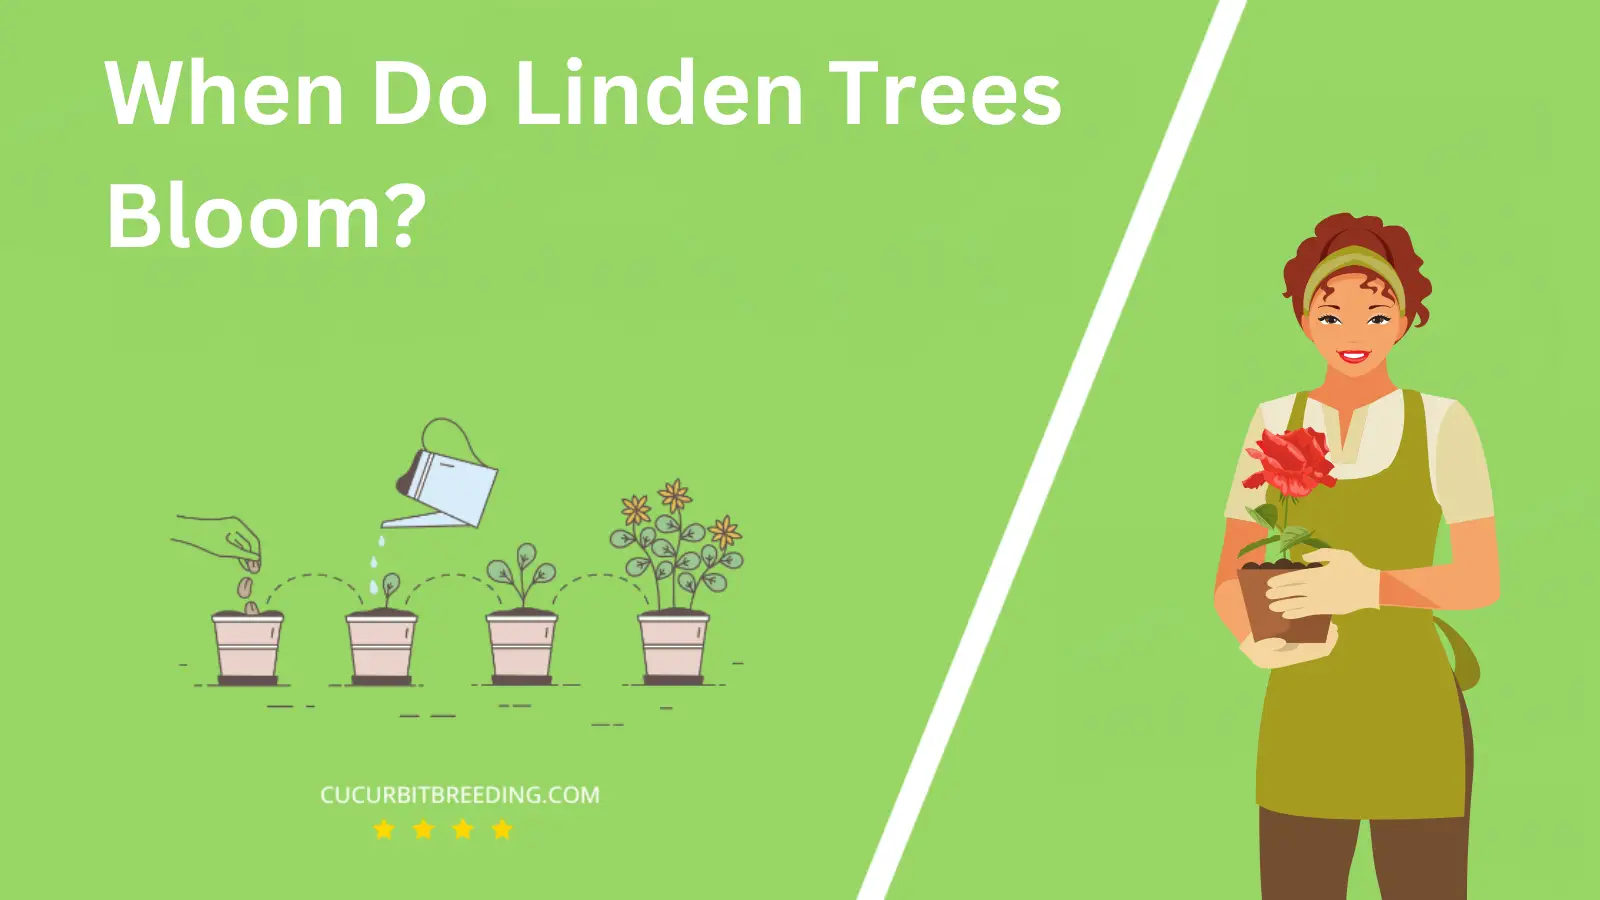 When Do Linden Trees Bloom?